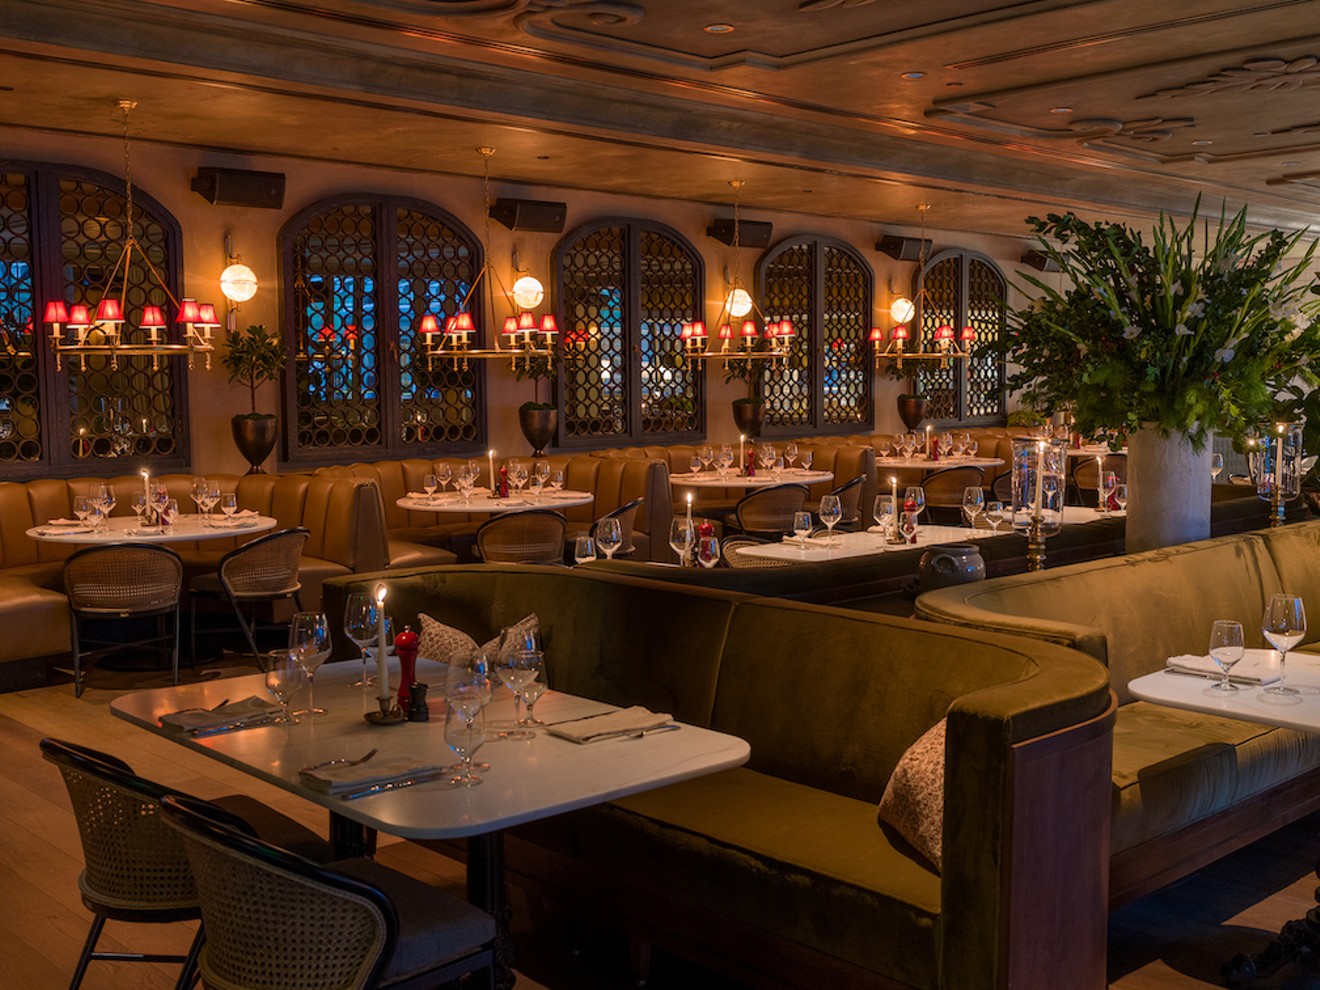 Le Âme, a Parisian-inspired steakhouse, is one of five dining concepts at The Global Ambassador.